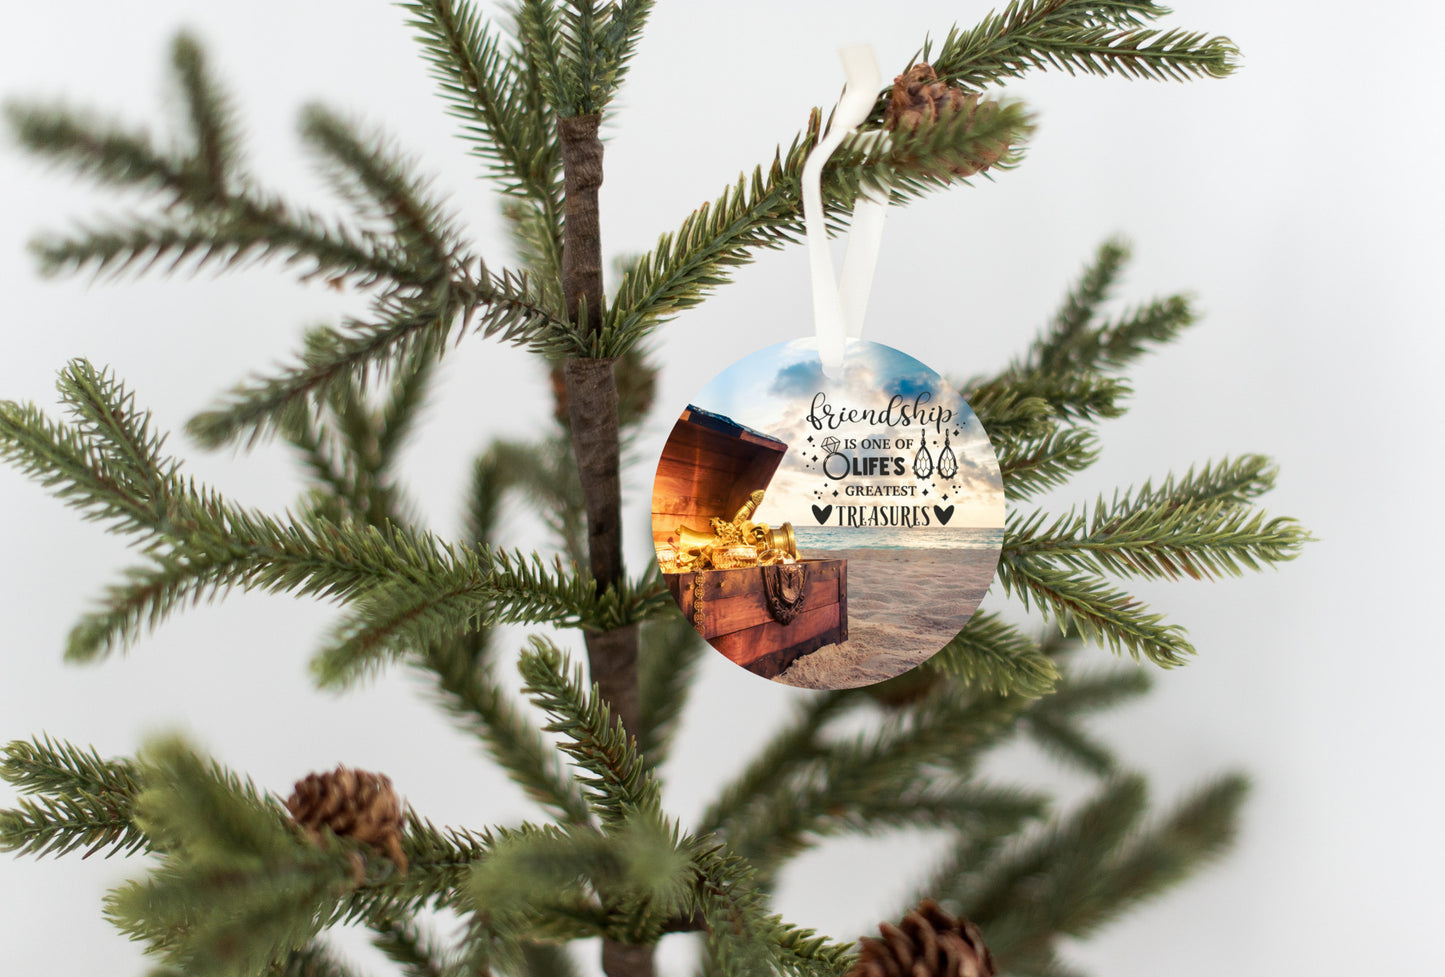 Friendship Is One Of Life's Greatest Treasures Round Holiday Ornament